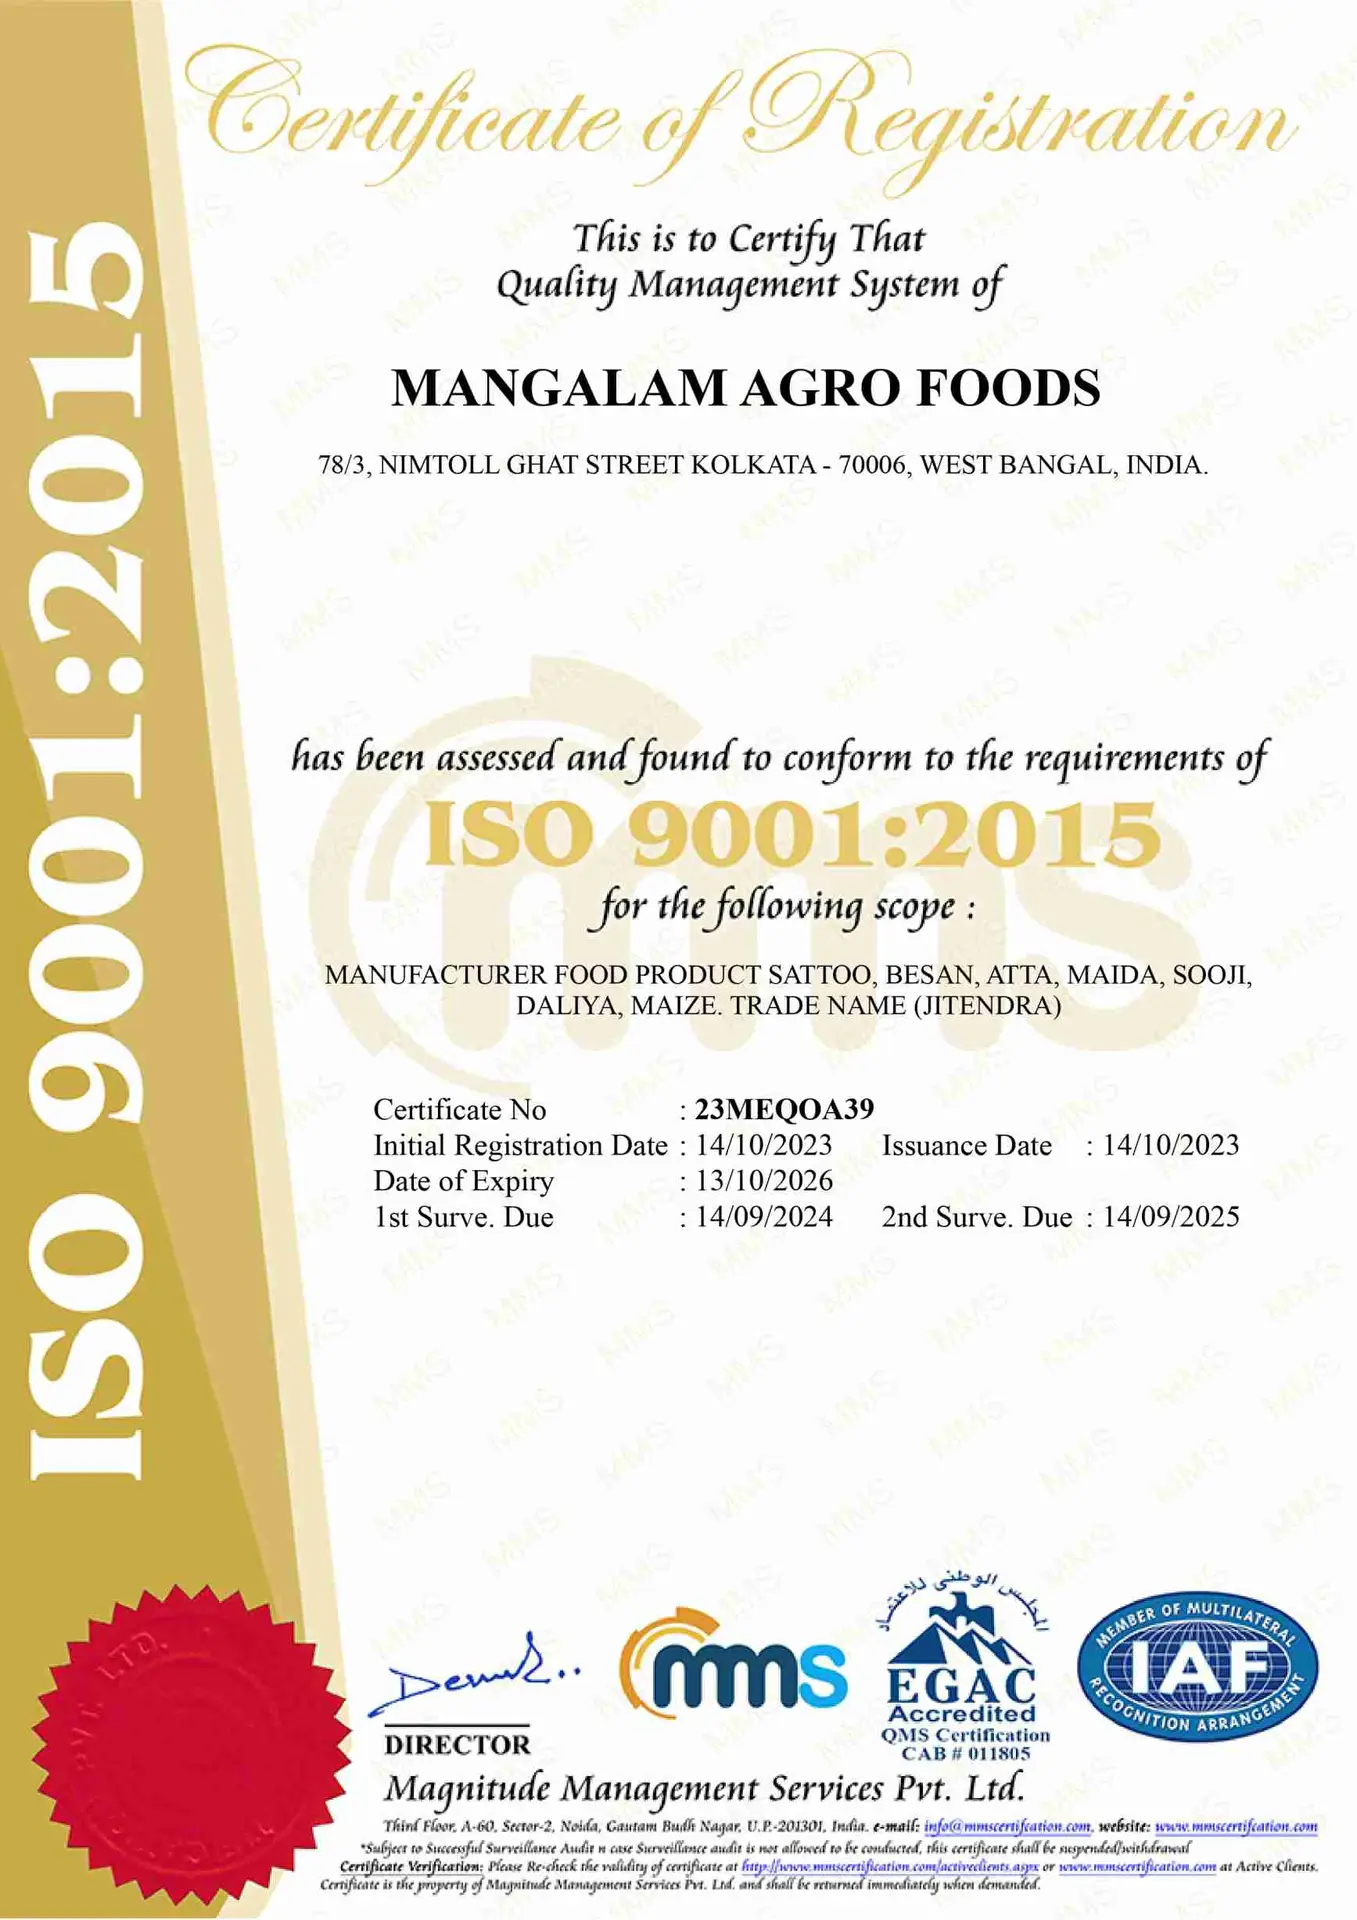 soft-copy-of-mangalam-agro-foods-iso-certificate